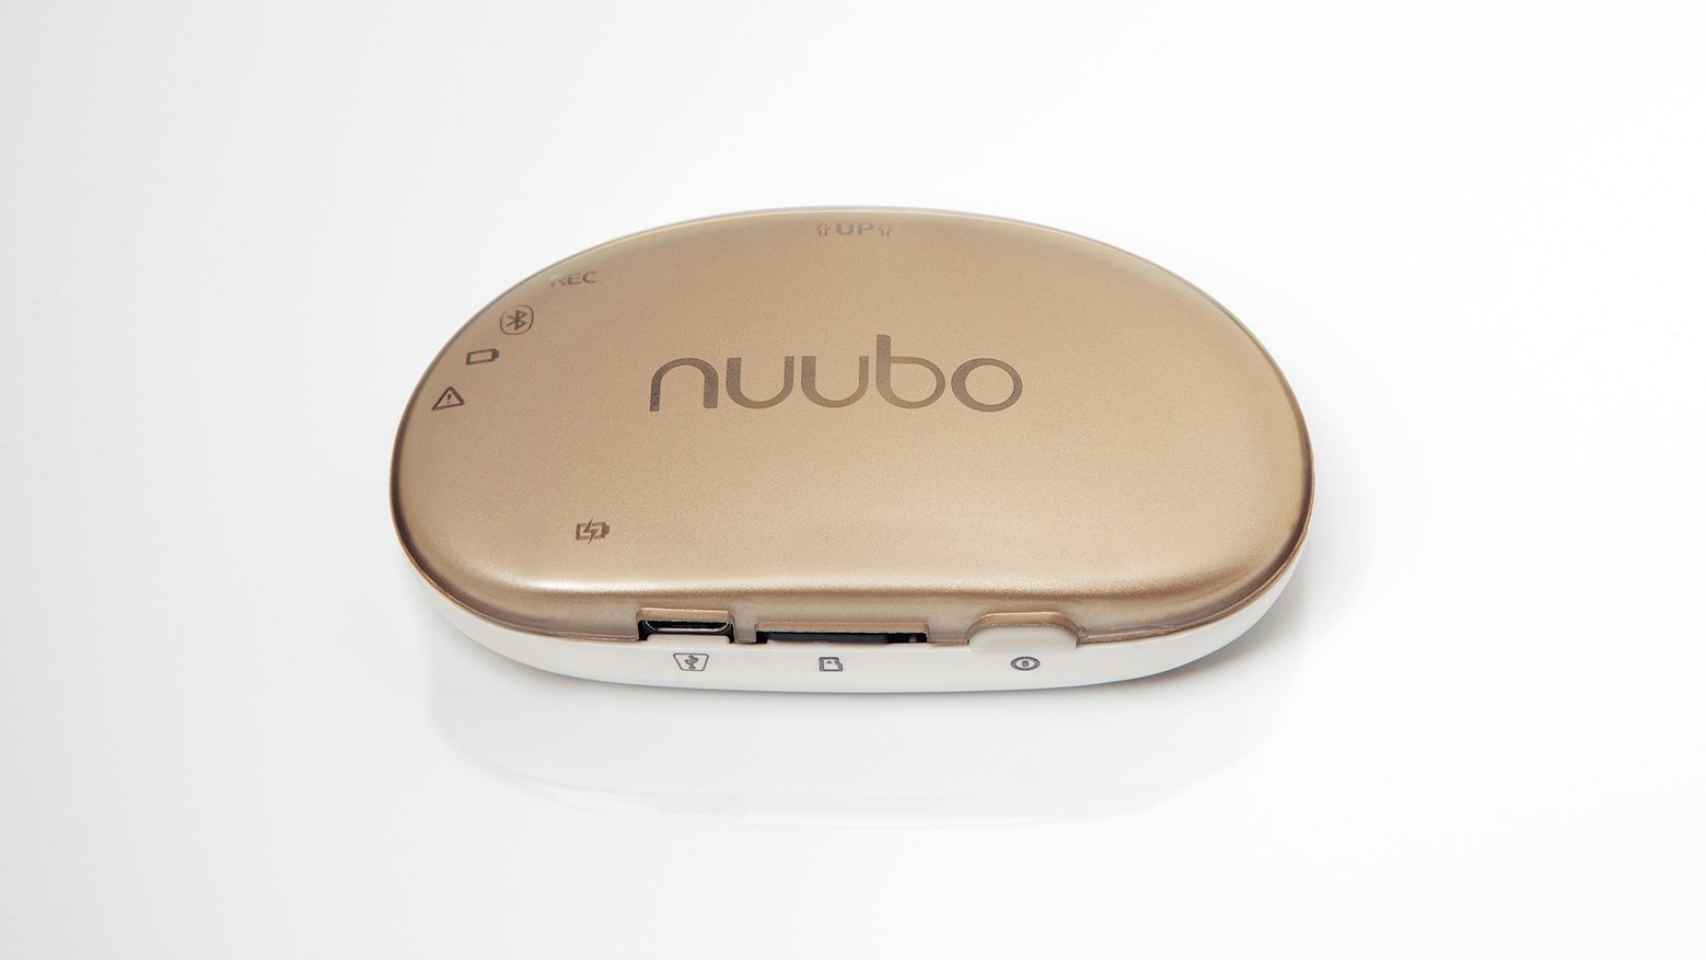 Nuubo System